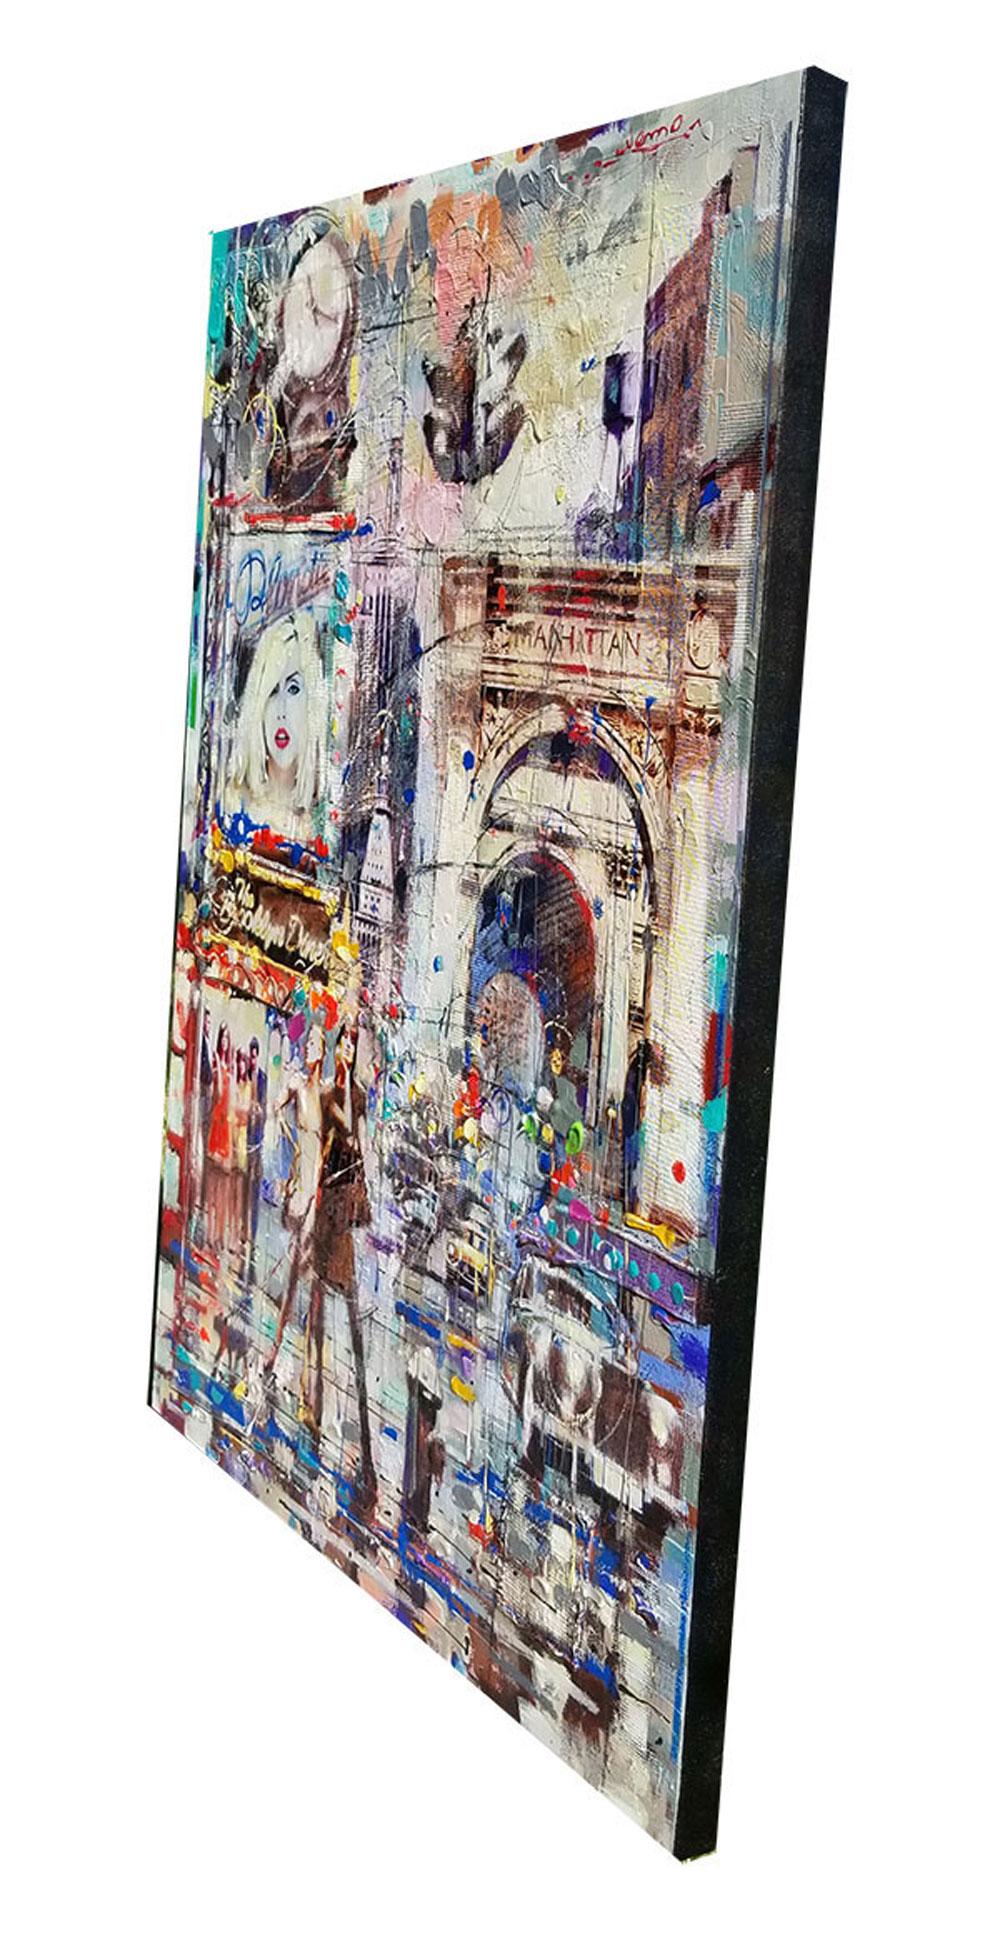 Artist: Victor Colesnicenco
Title: To Manhattan
Medium: Original Mixed Media on Canvas
Signature: Hand-signed by the Artist
Size: Approximately 36x48 inches
Framed: Frame size 38x50 inches
Biography: Victor Colesnicenco (NEMO) grew up in Chisinau,